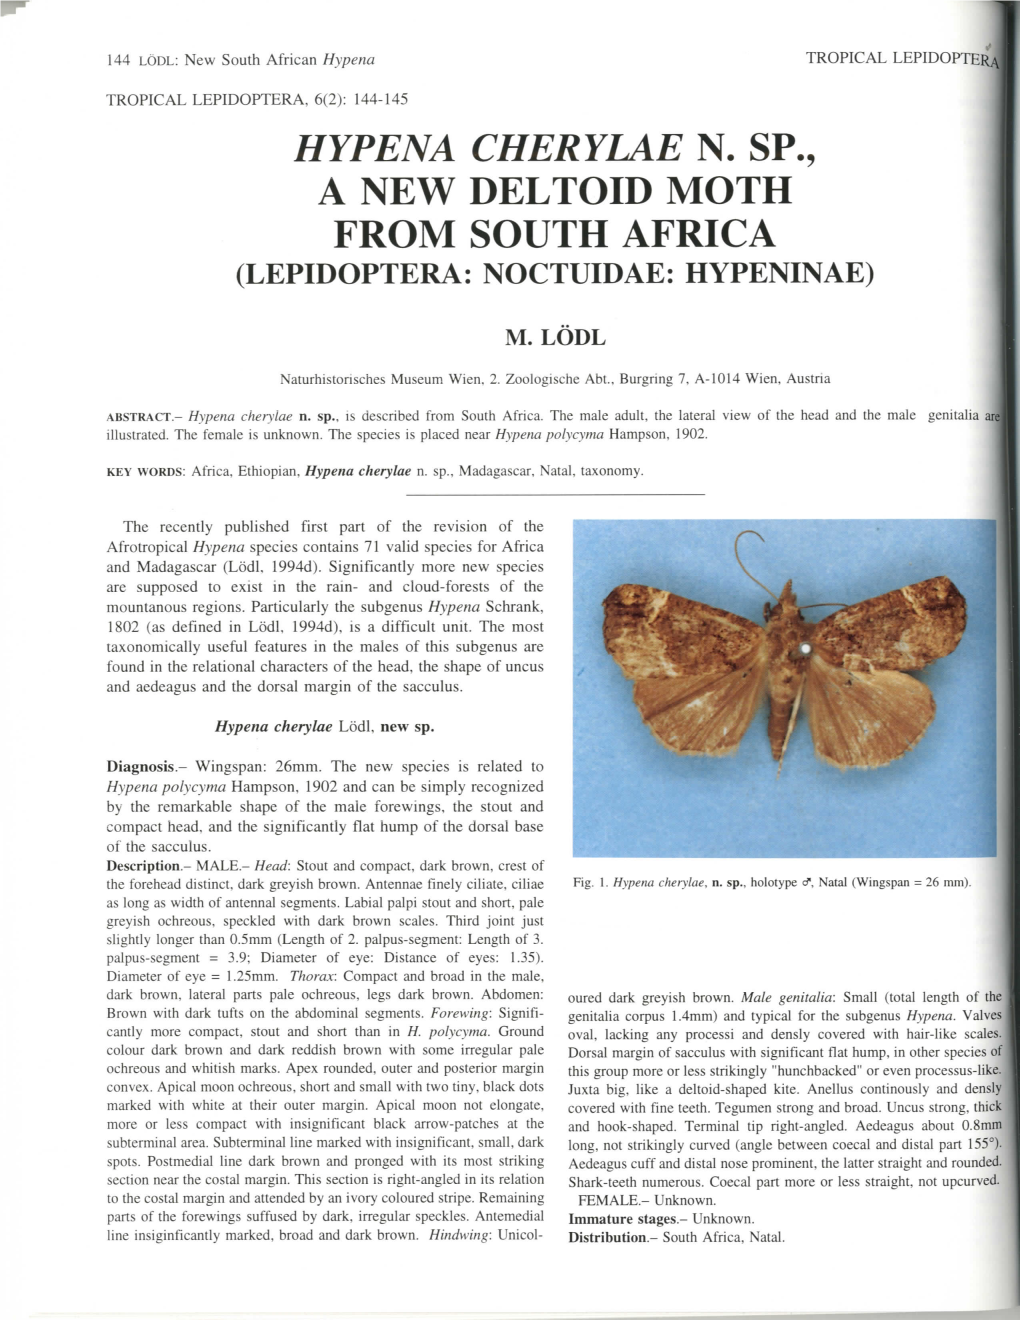 Hypena Cherylae N. Sp., a New Deltoid Moth from South Africa (Lepidoptera: Noctuidae: Hypeninae)